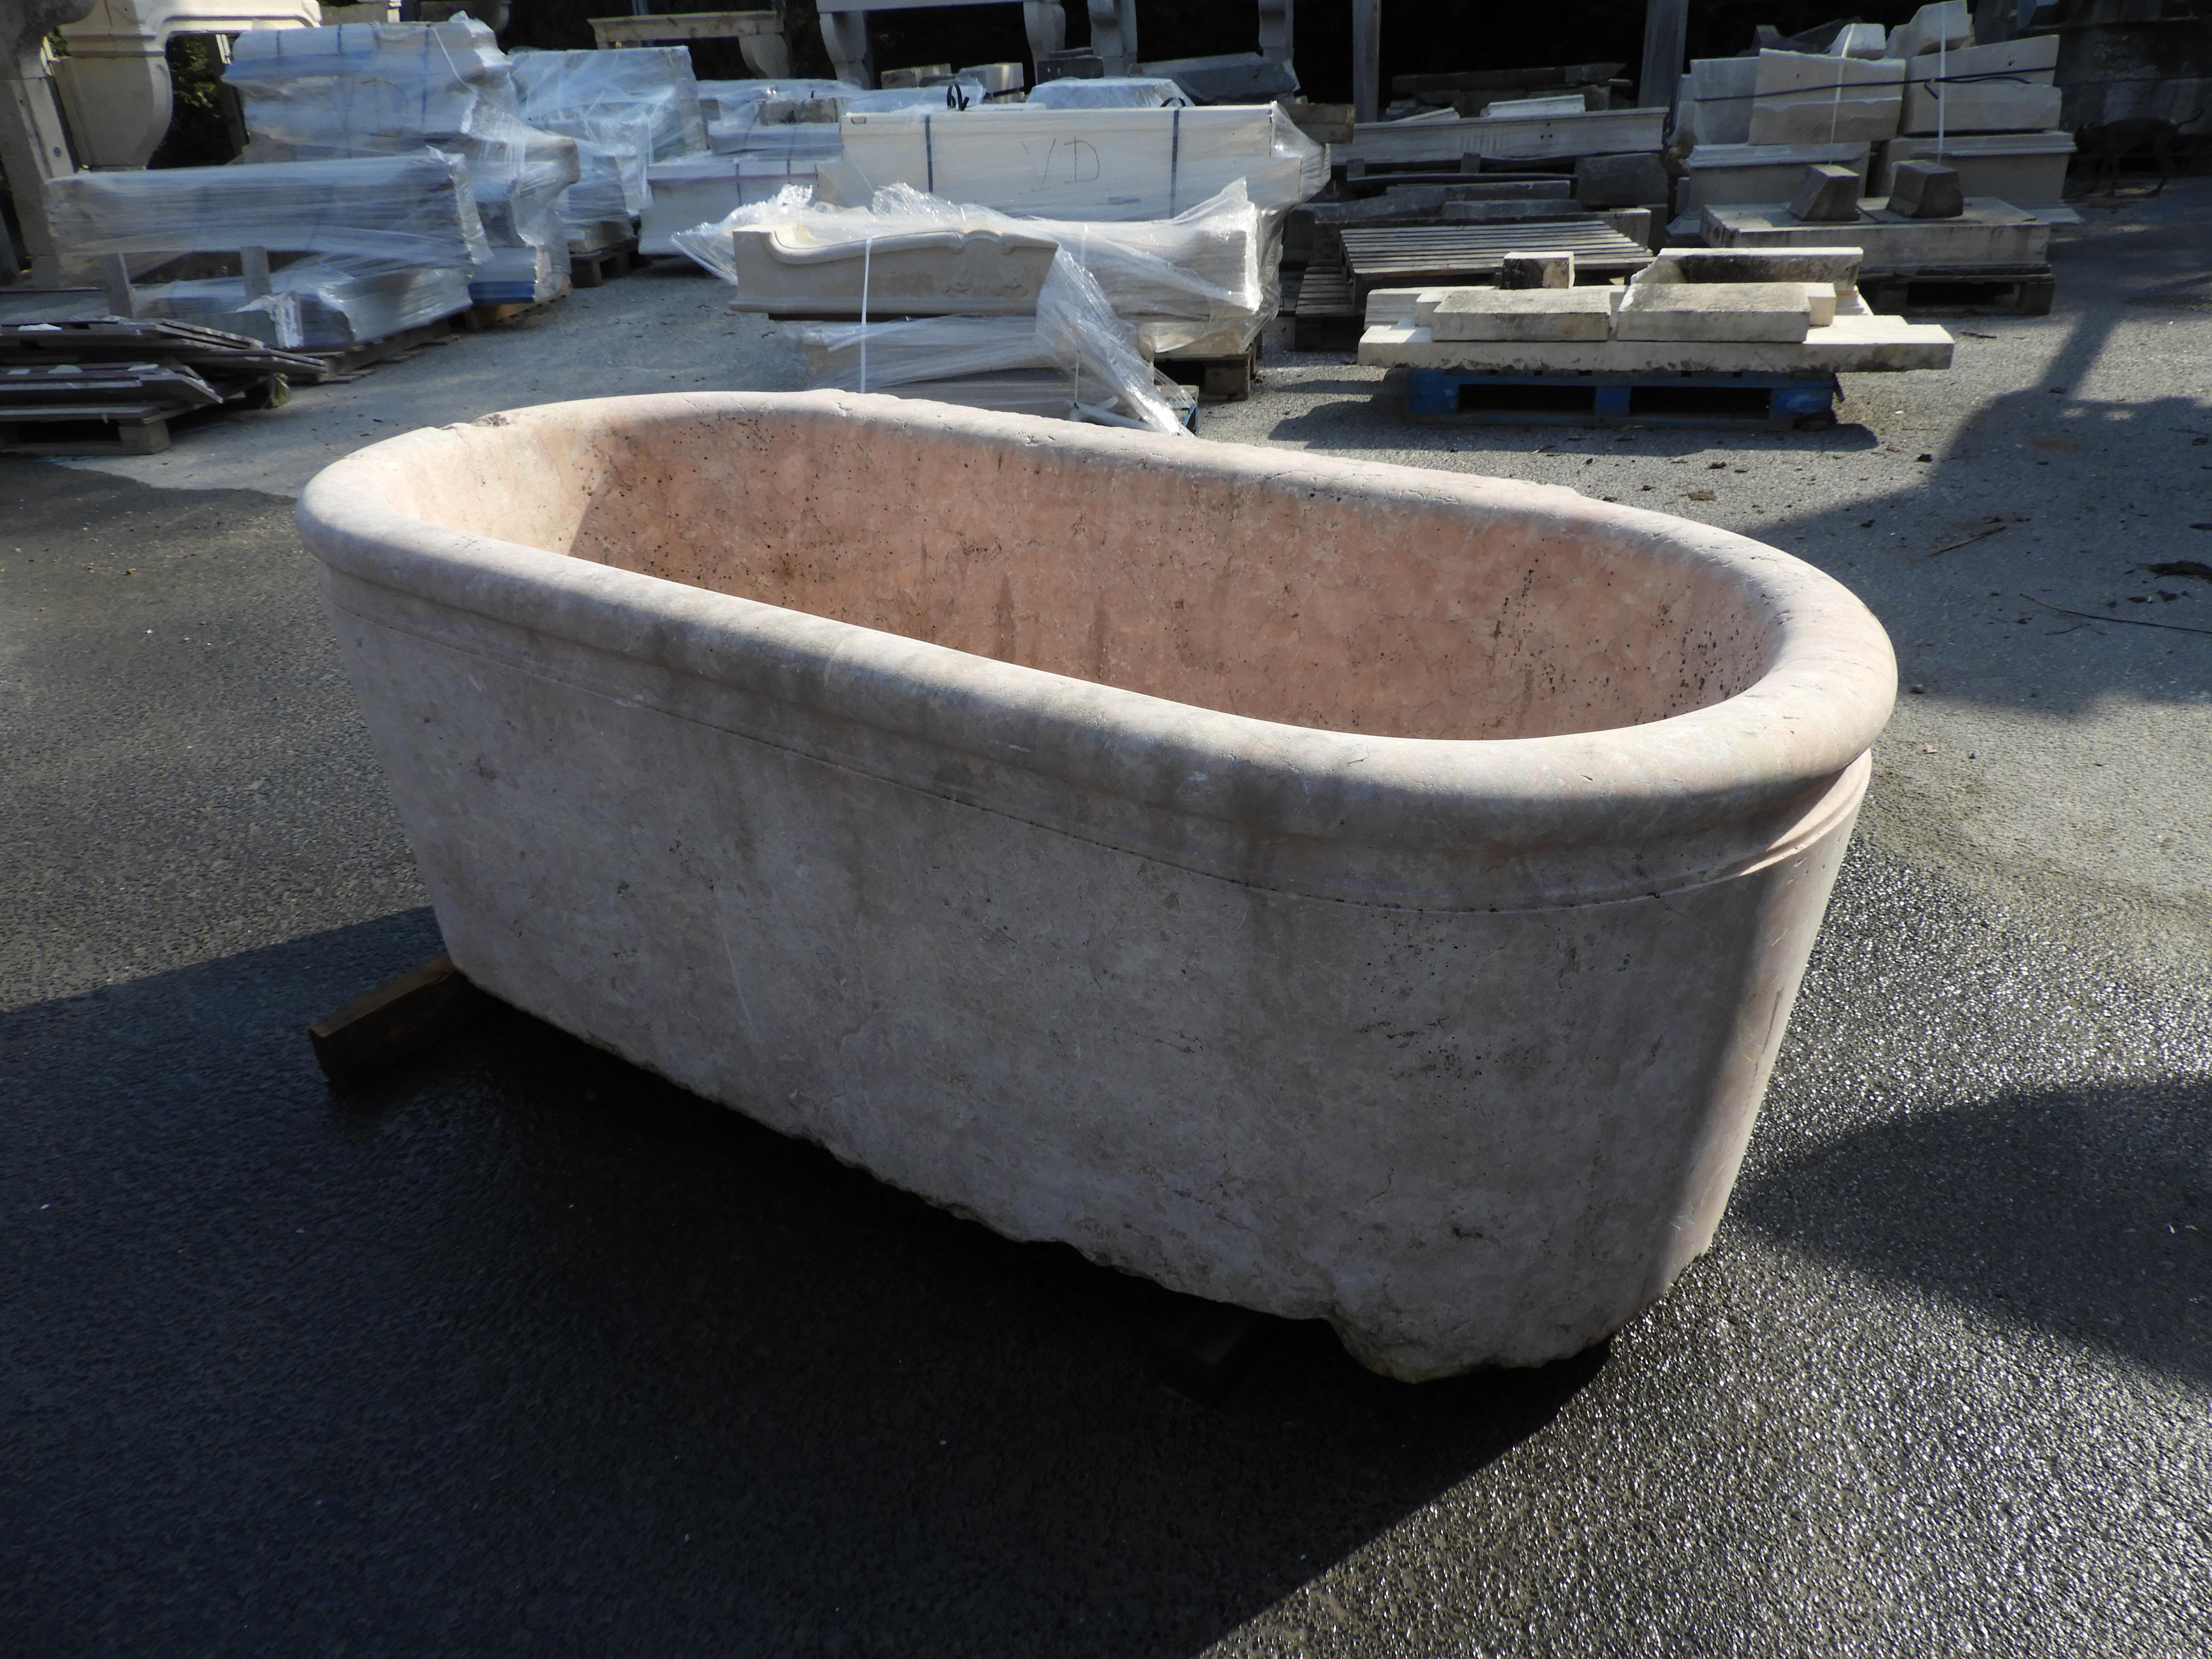 19th century solid marble bathtub in Rojo Alicante from the area of Alicante. Hand-carved out of 1 solid block of marble.